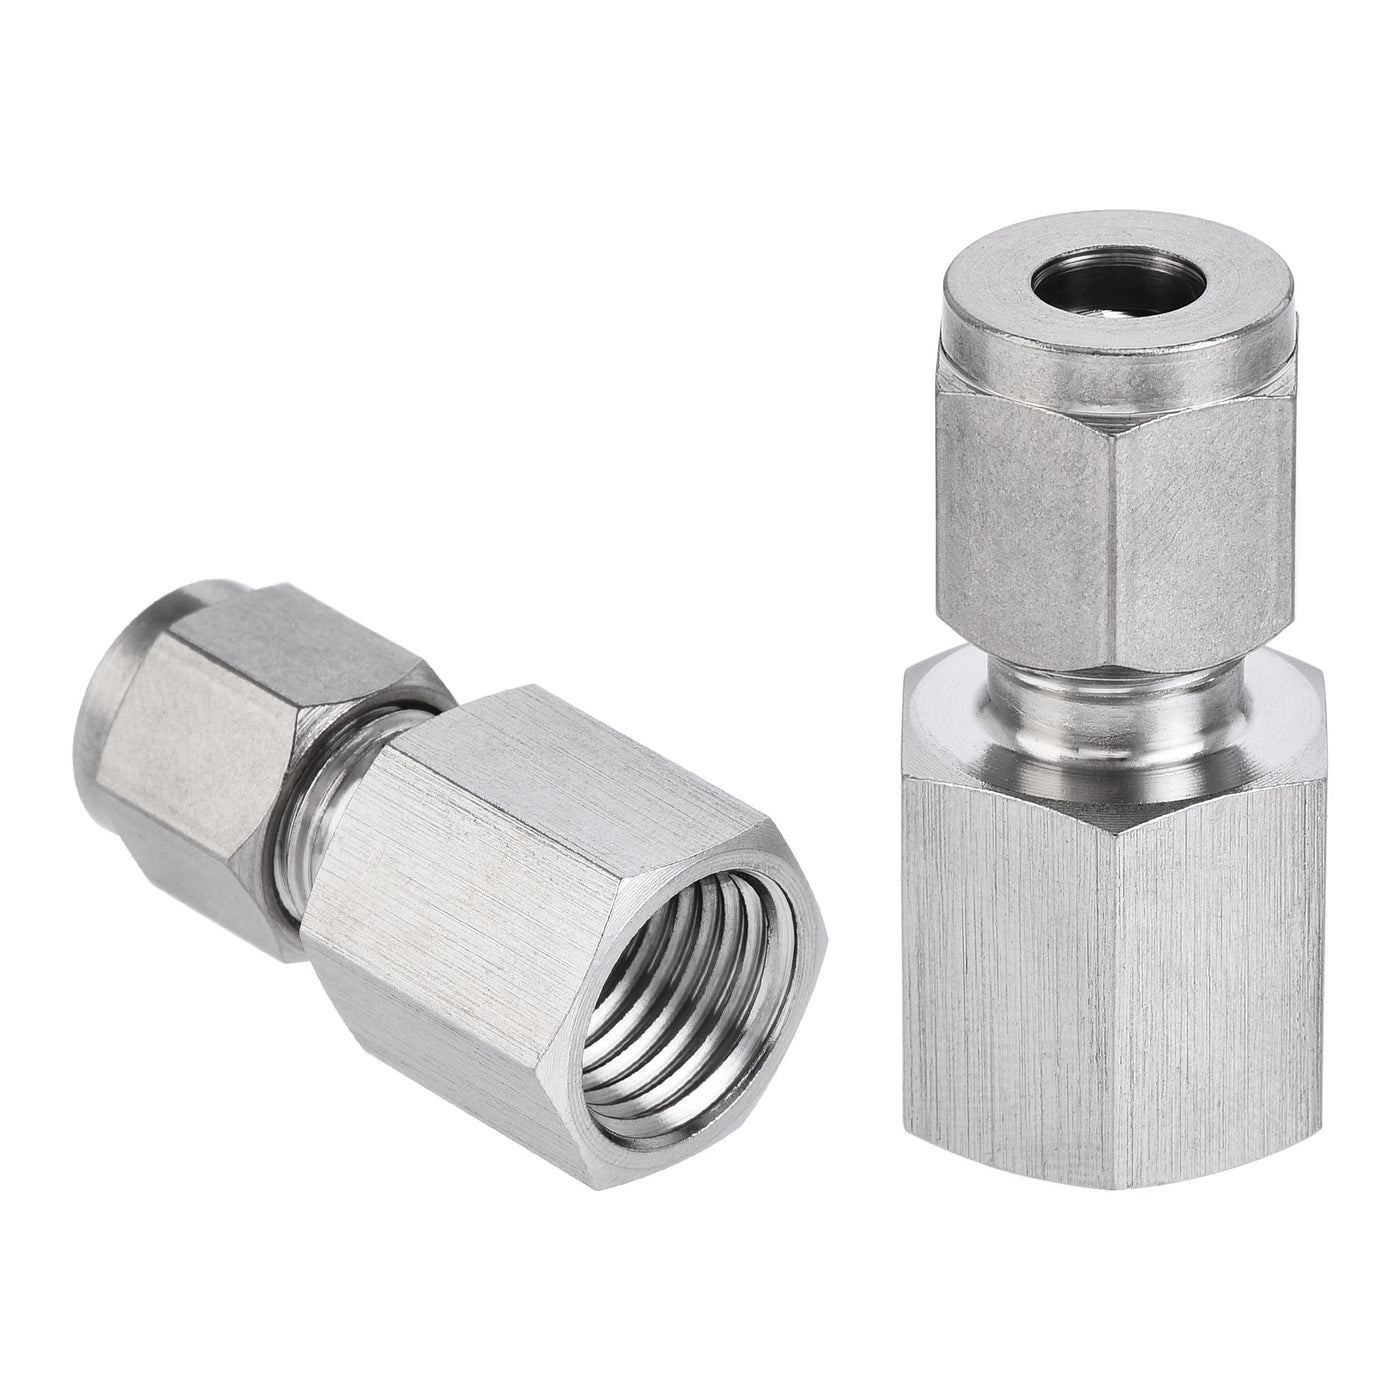 uxcell Uxcell Compression Tube Fitting G1/4 Female Thread x 1/4" Tube OD Straight Coupling Adapter 304 Stainless Steel 2Pcs